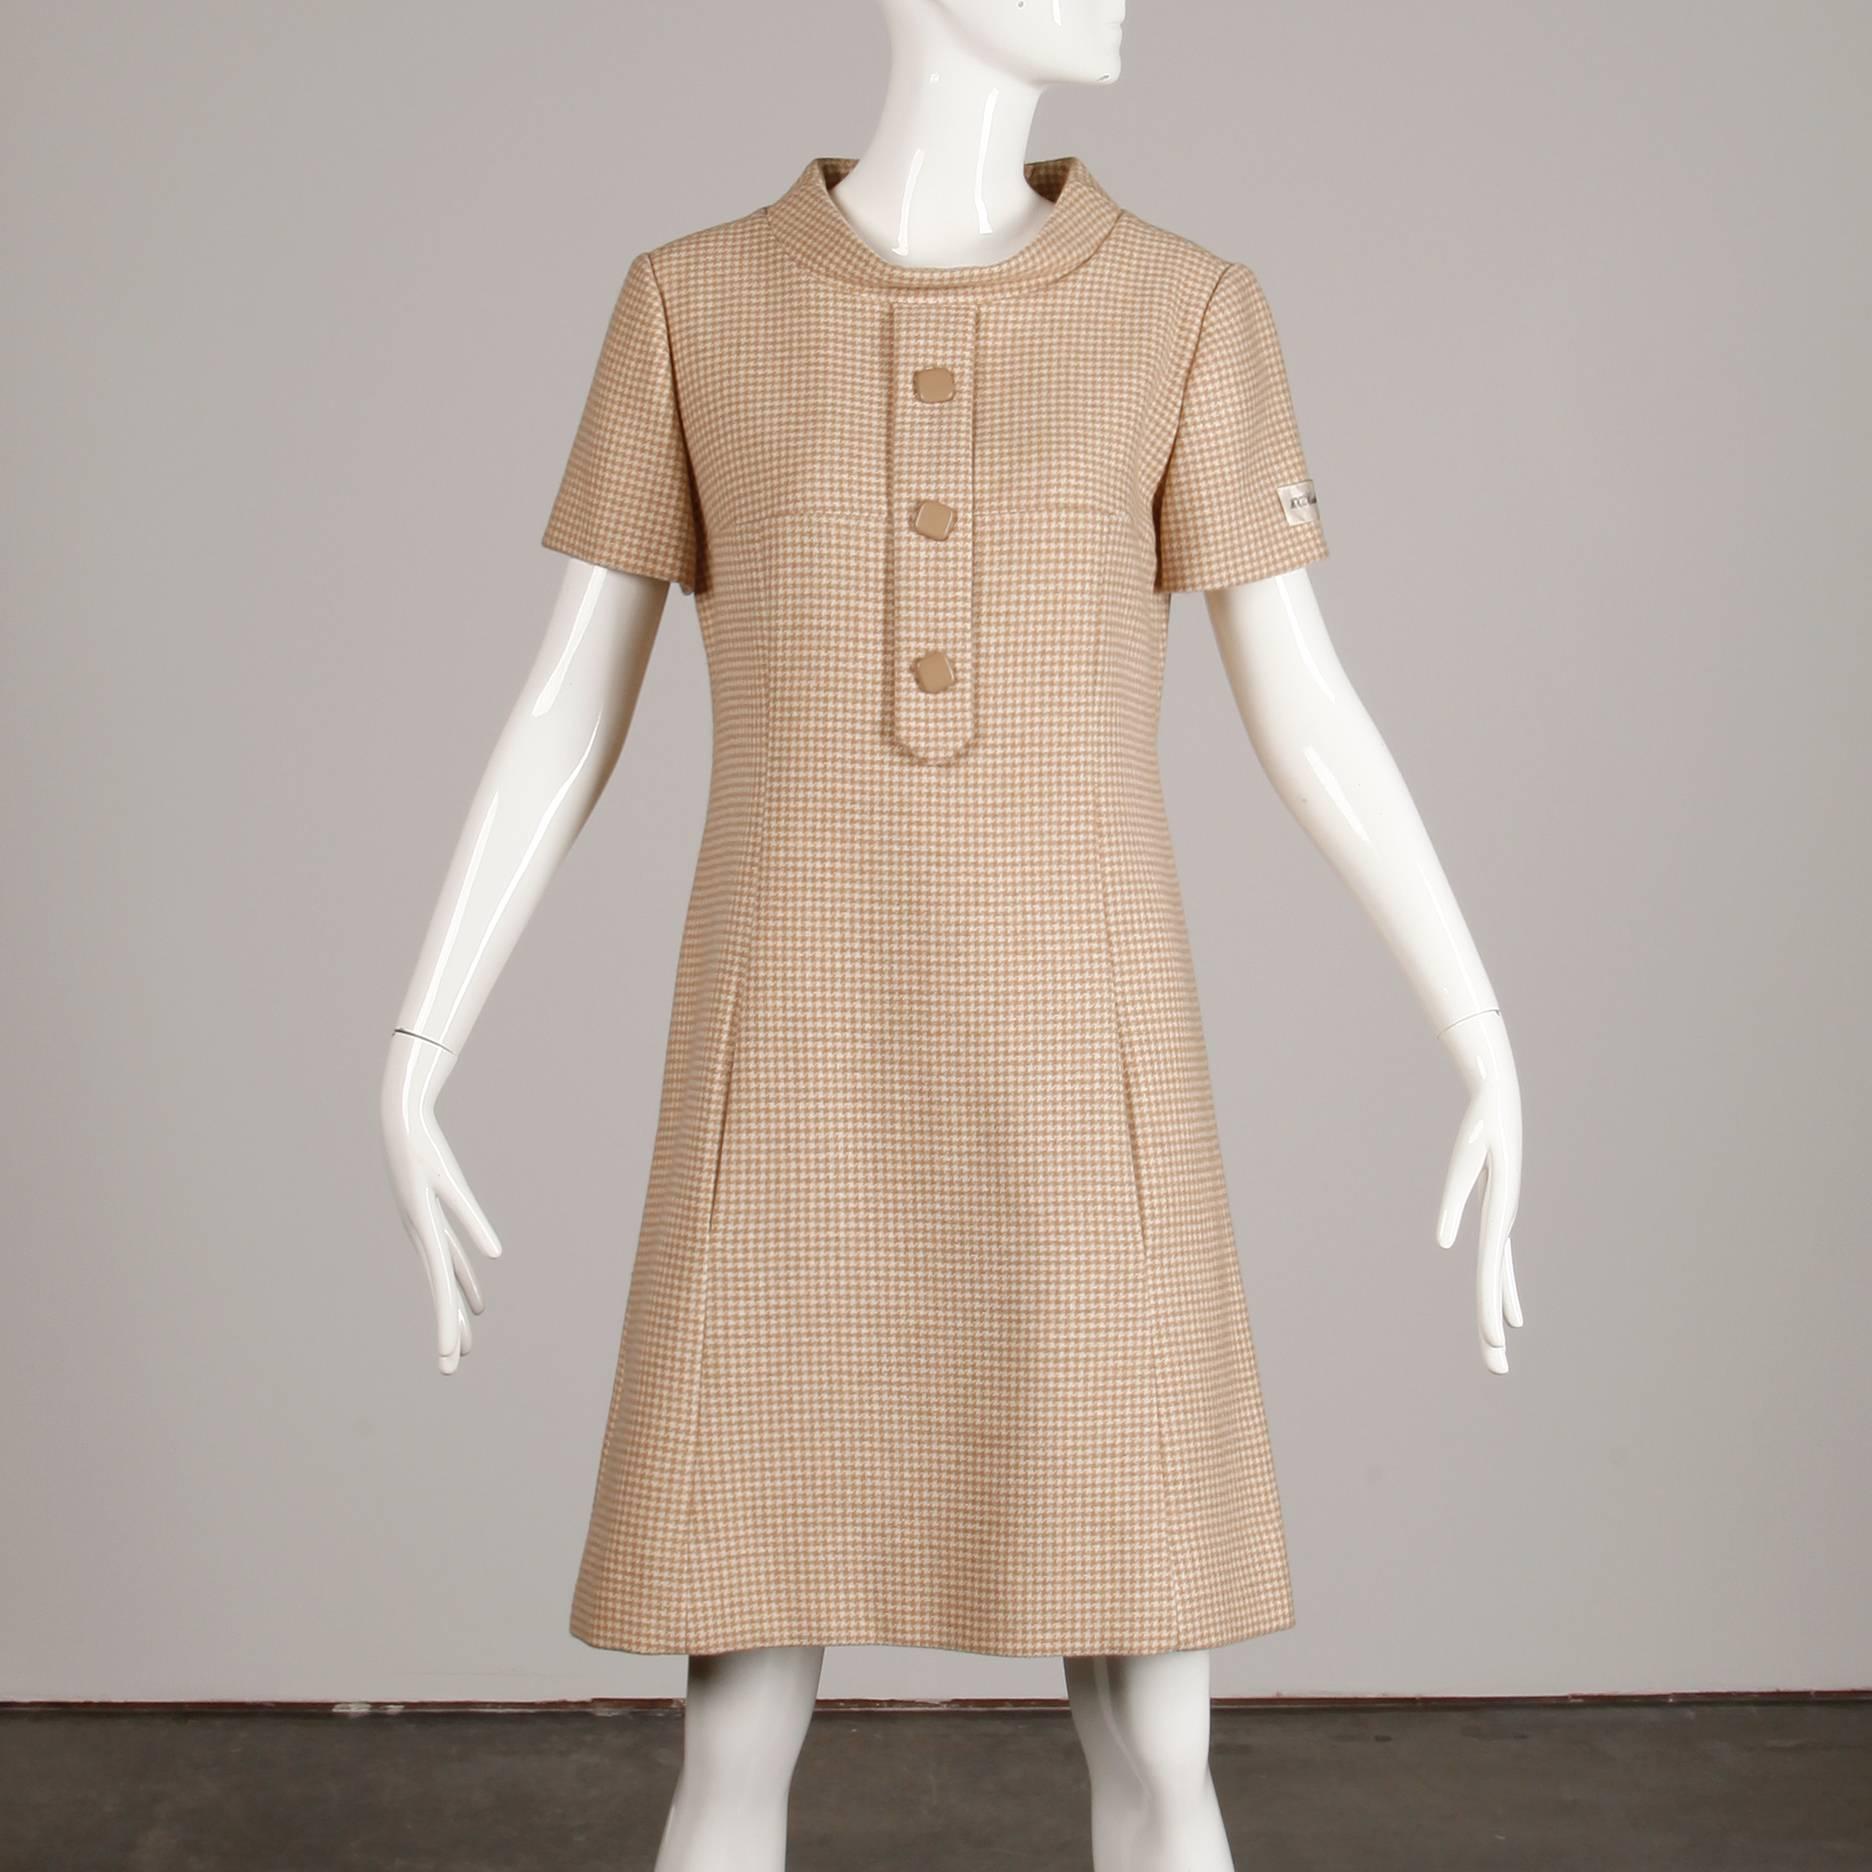 Unworn with the original tag still attached to the sleeve! Vintage 1960s shift dress by Charles Cooper in super soft beige and off white cashmere. Fully lined with rear zip closure. Front hidden pockets. 100% cashmere. Fits like a modern size